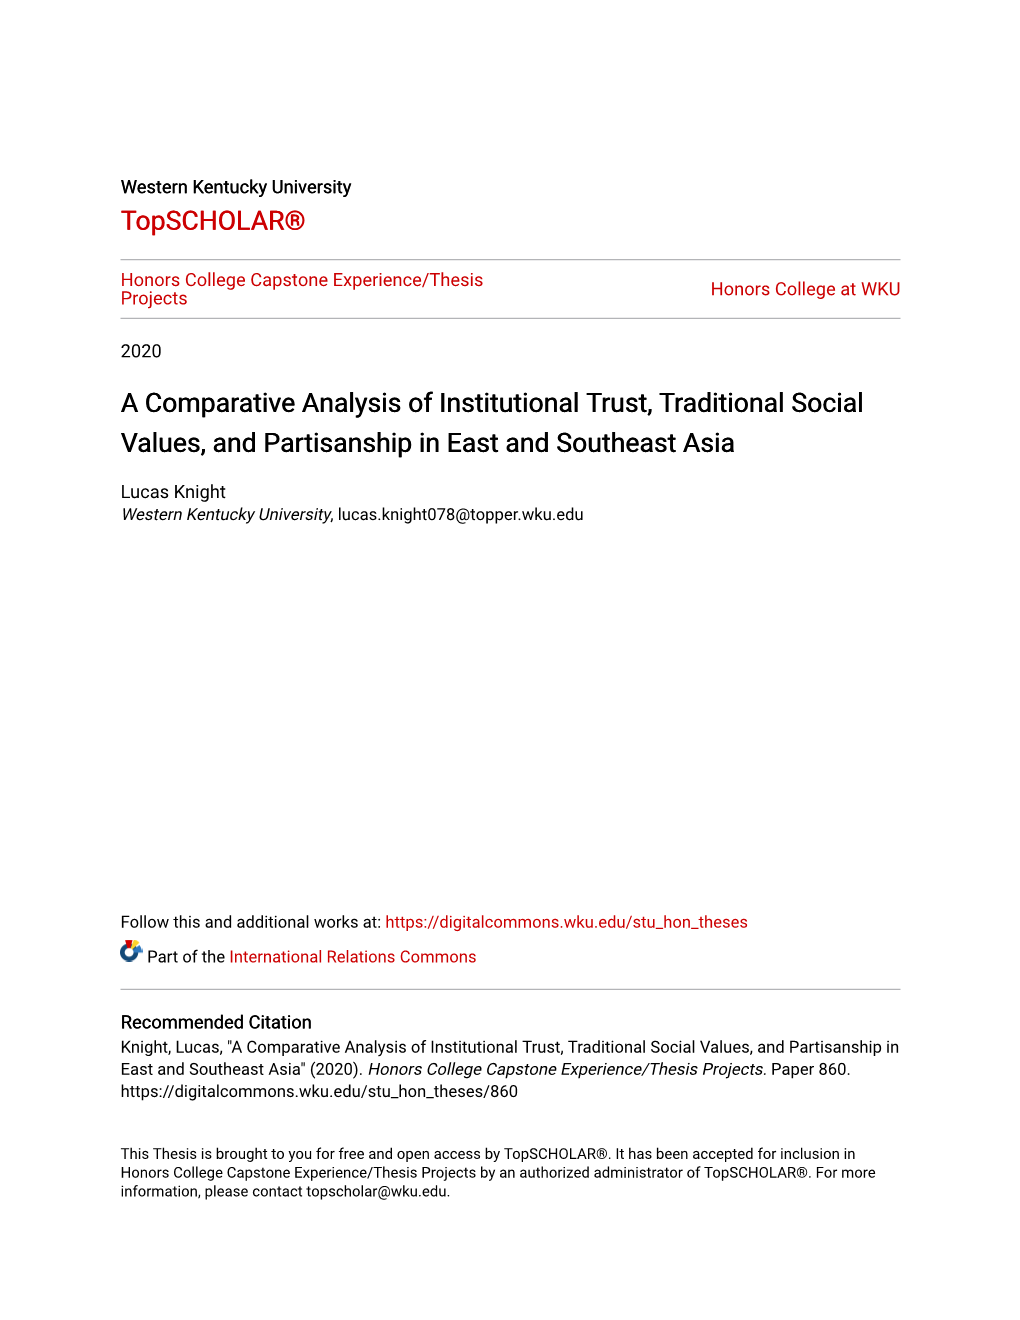 A Comparative Analysis of Institutional Trust, Traditional Social Values, and Partisanship in East and Southeast Asia